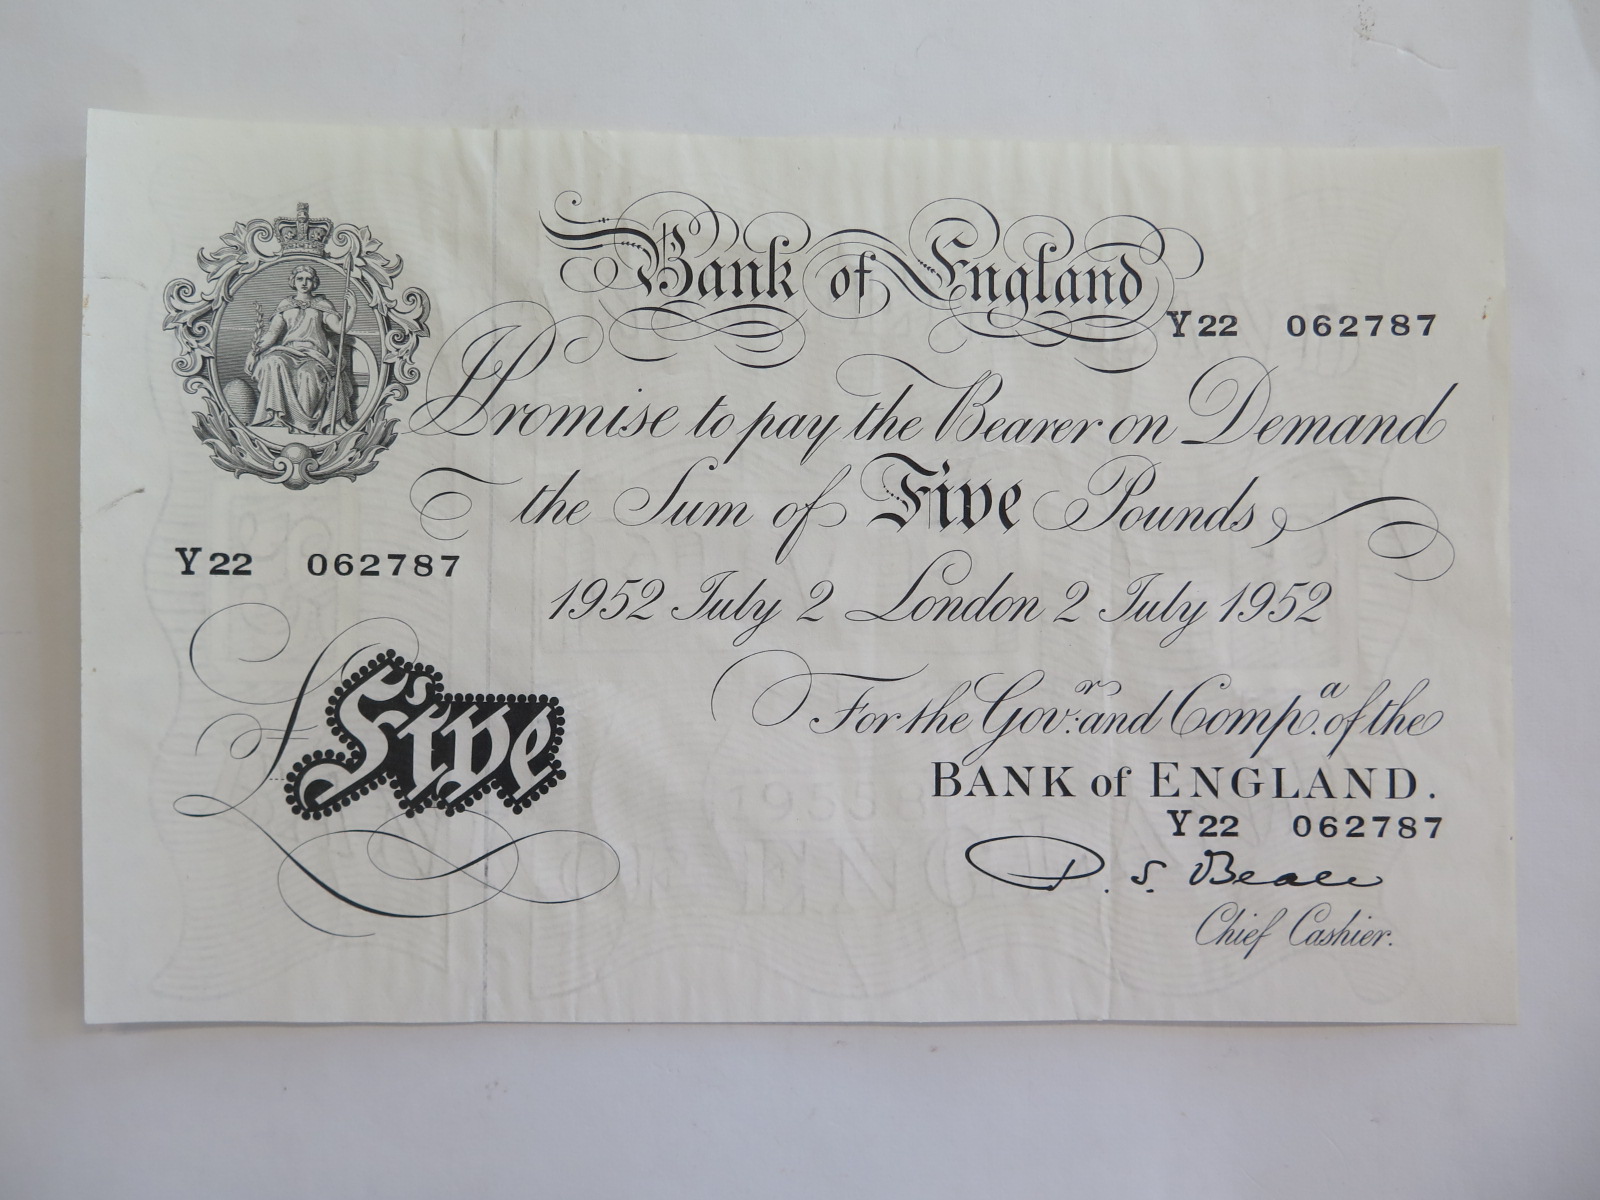 A Bank of England White five pound note - July 2 1952, chief cashier - P S Beale - Y22 062787 - good